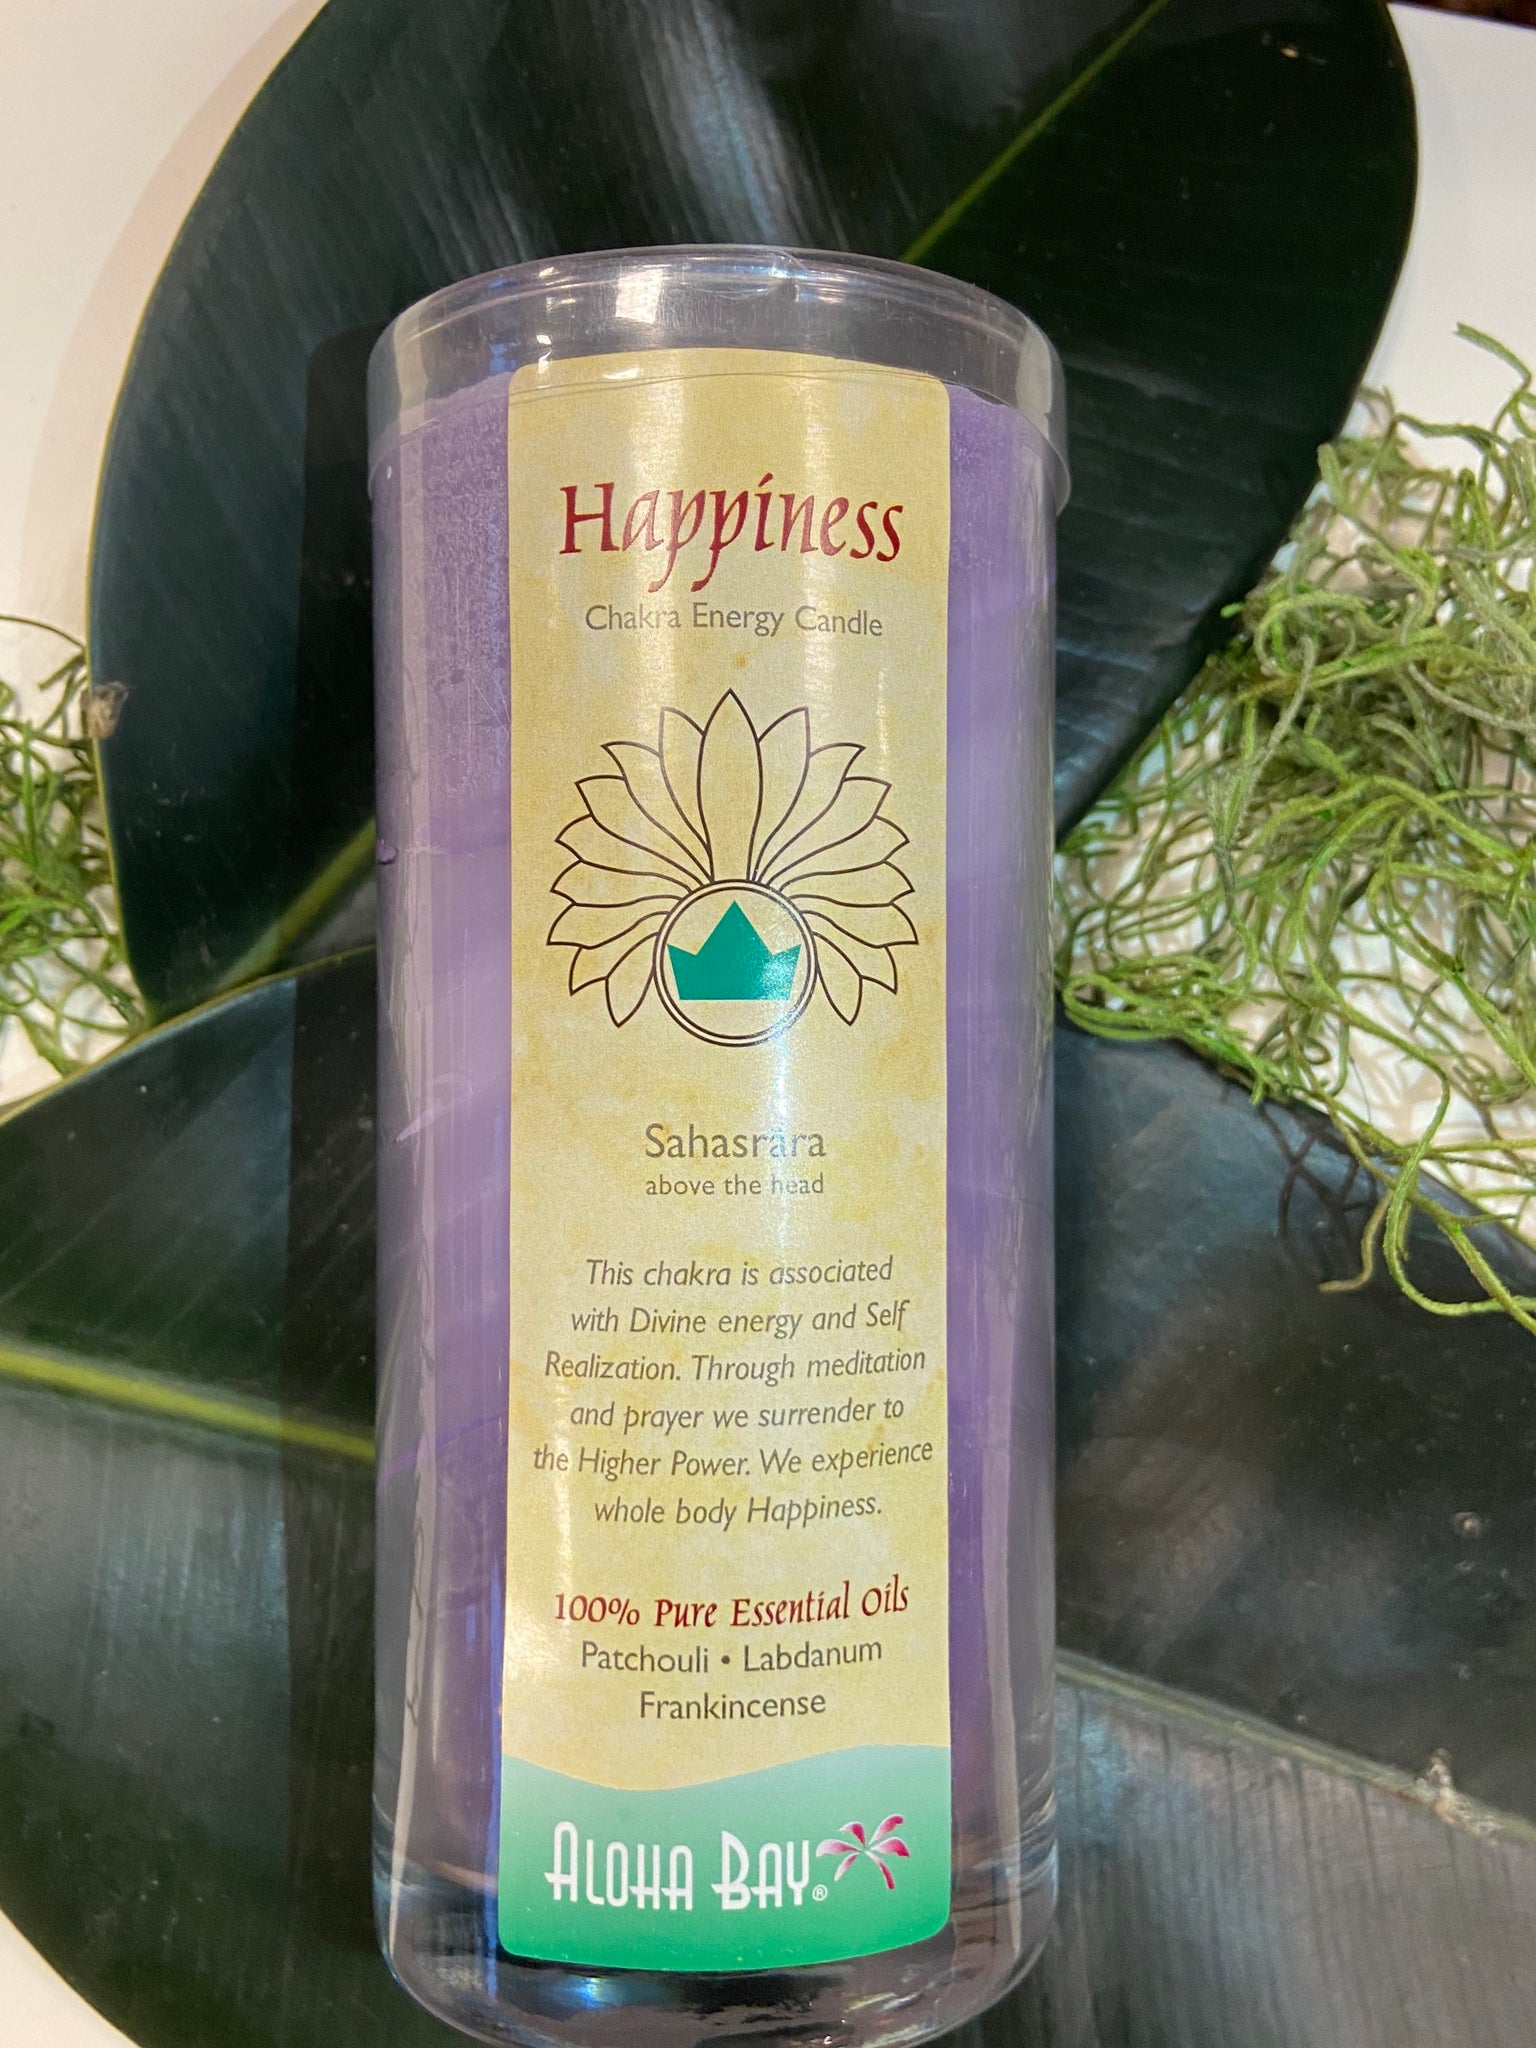 Happiness candle